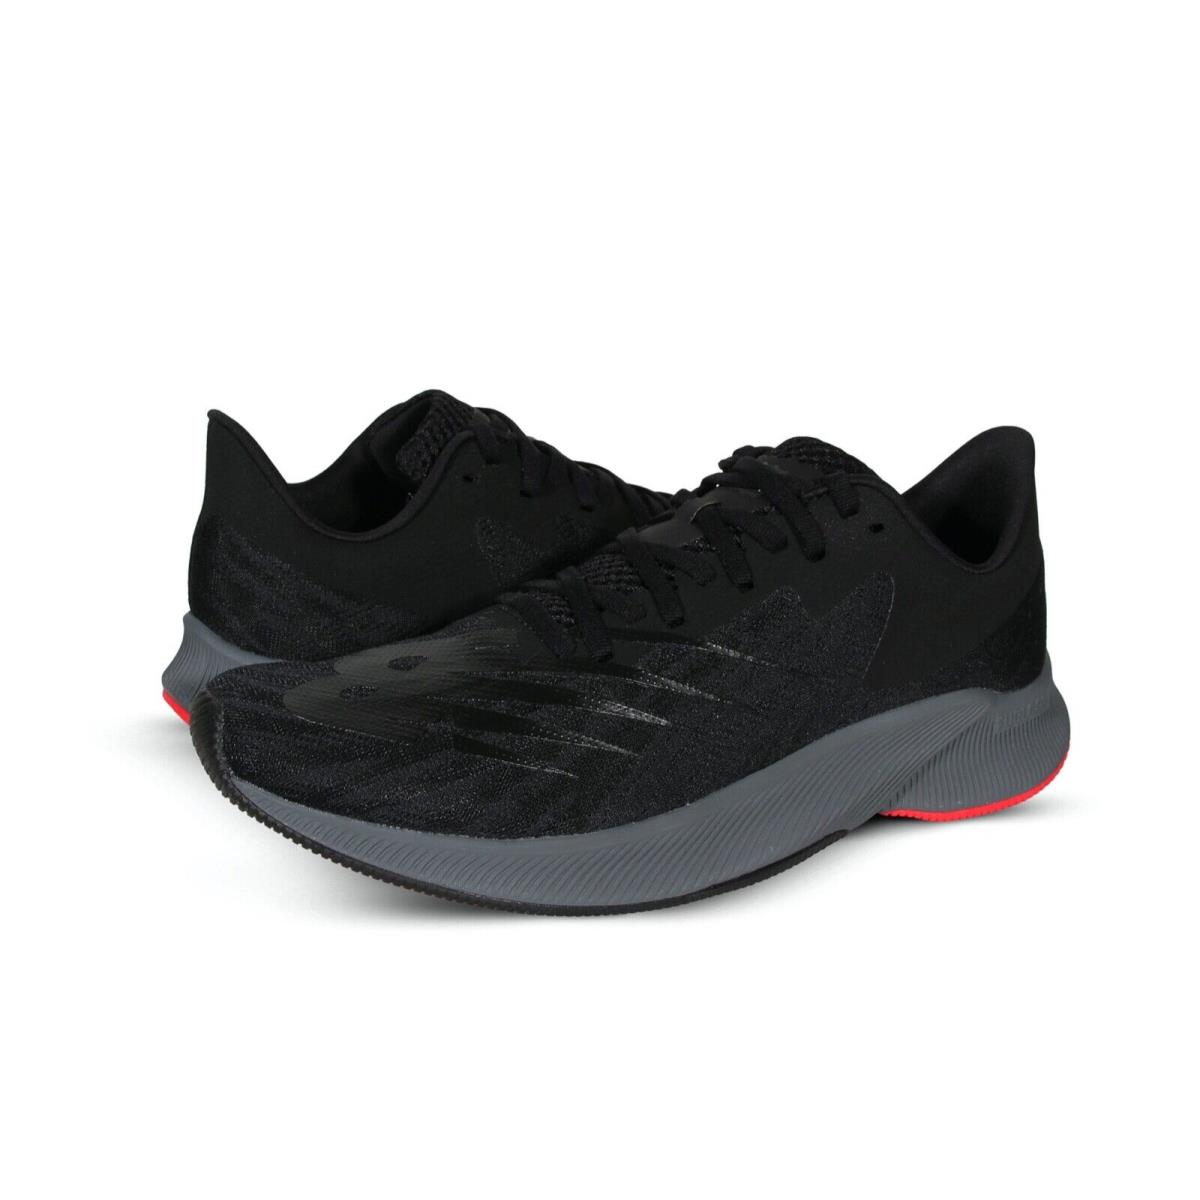 Balance Fuelcell Prism Men s Running Shoes in Black with Lead Mfcpzbg